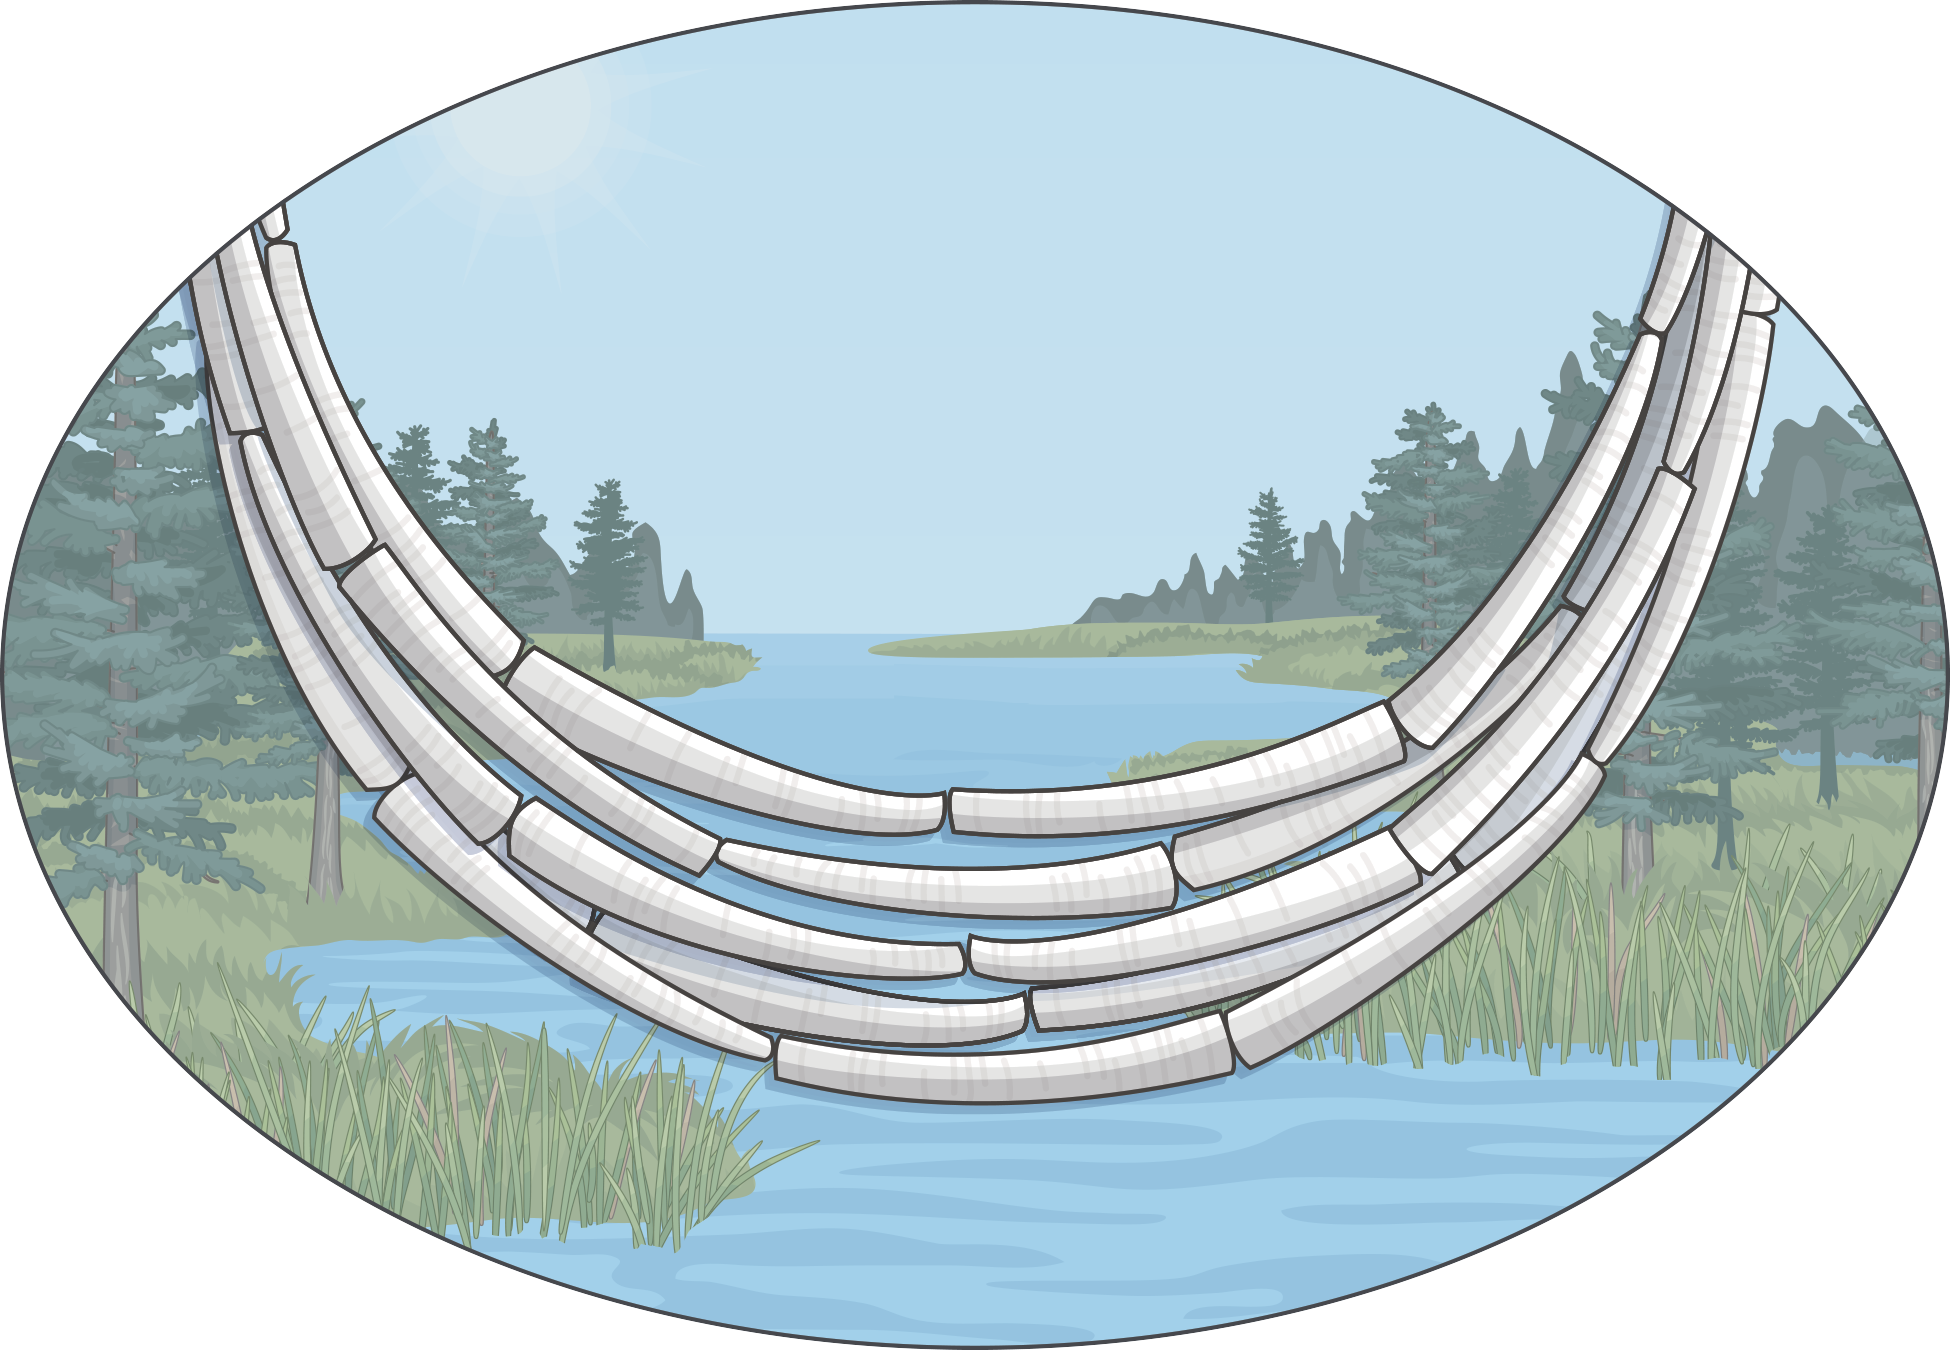 An illustration of a tribal necklace over a river with trees lining either side.